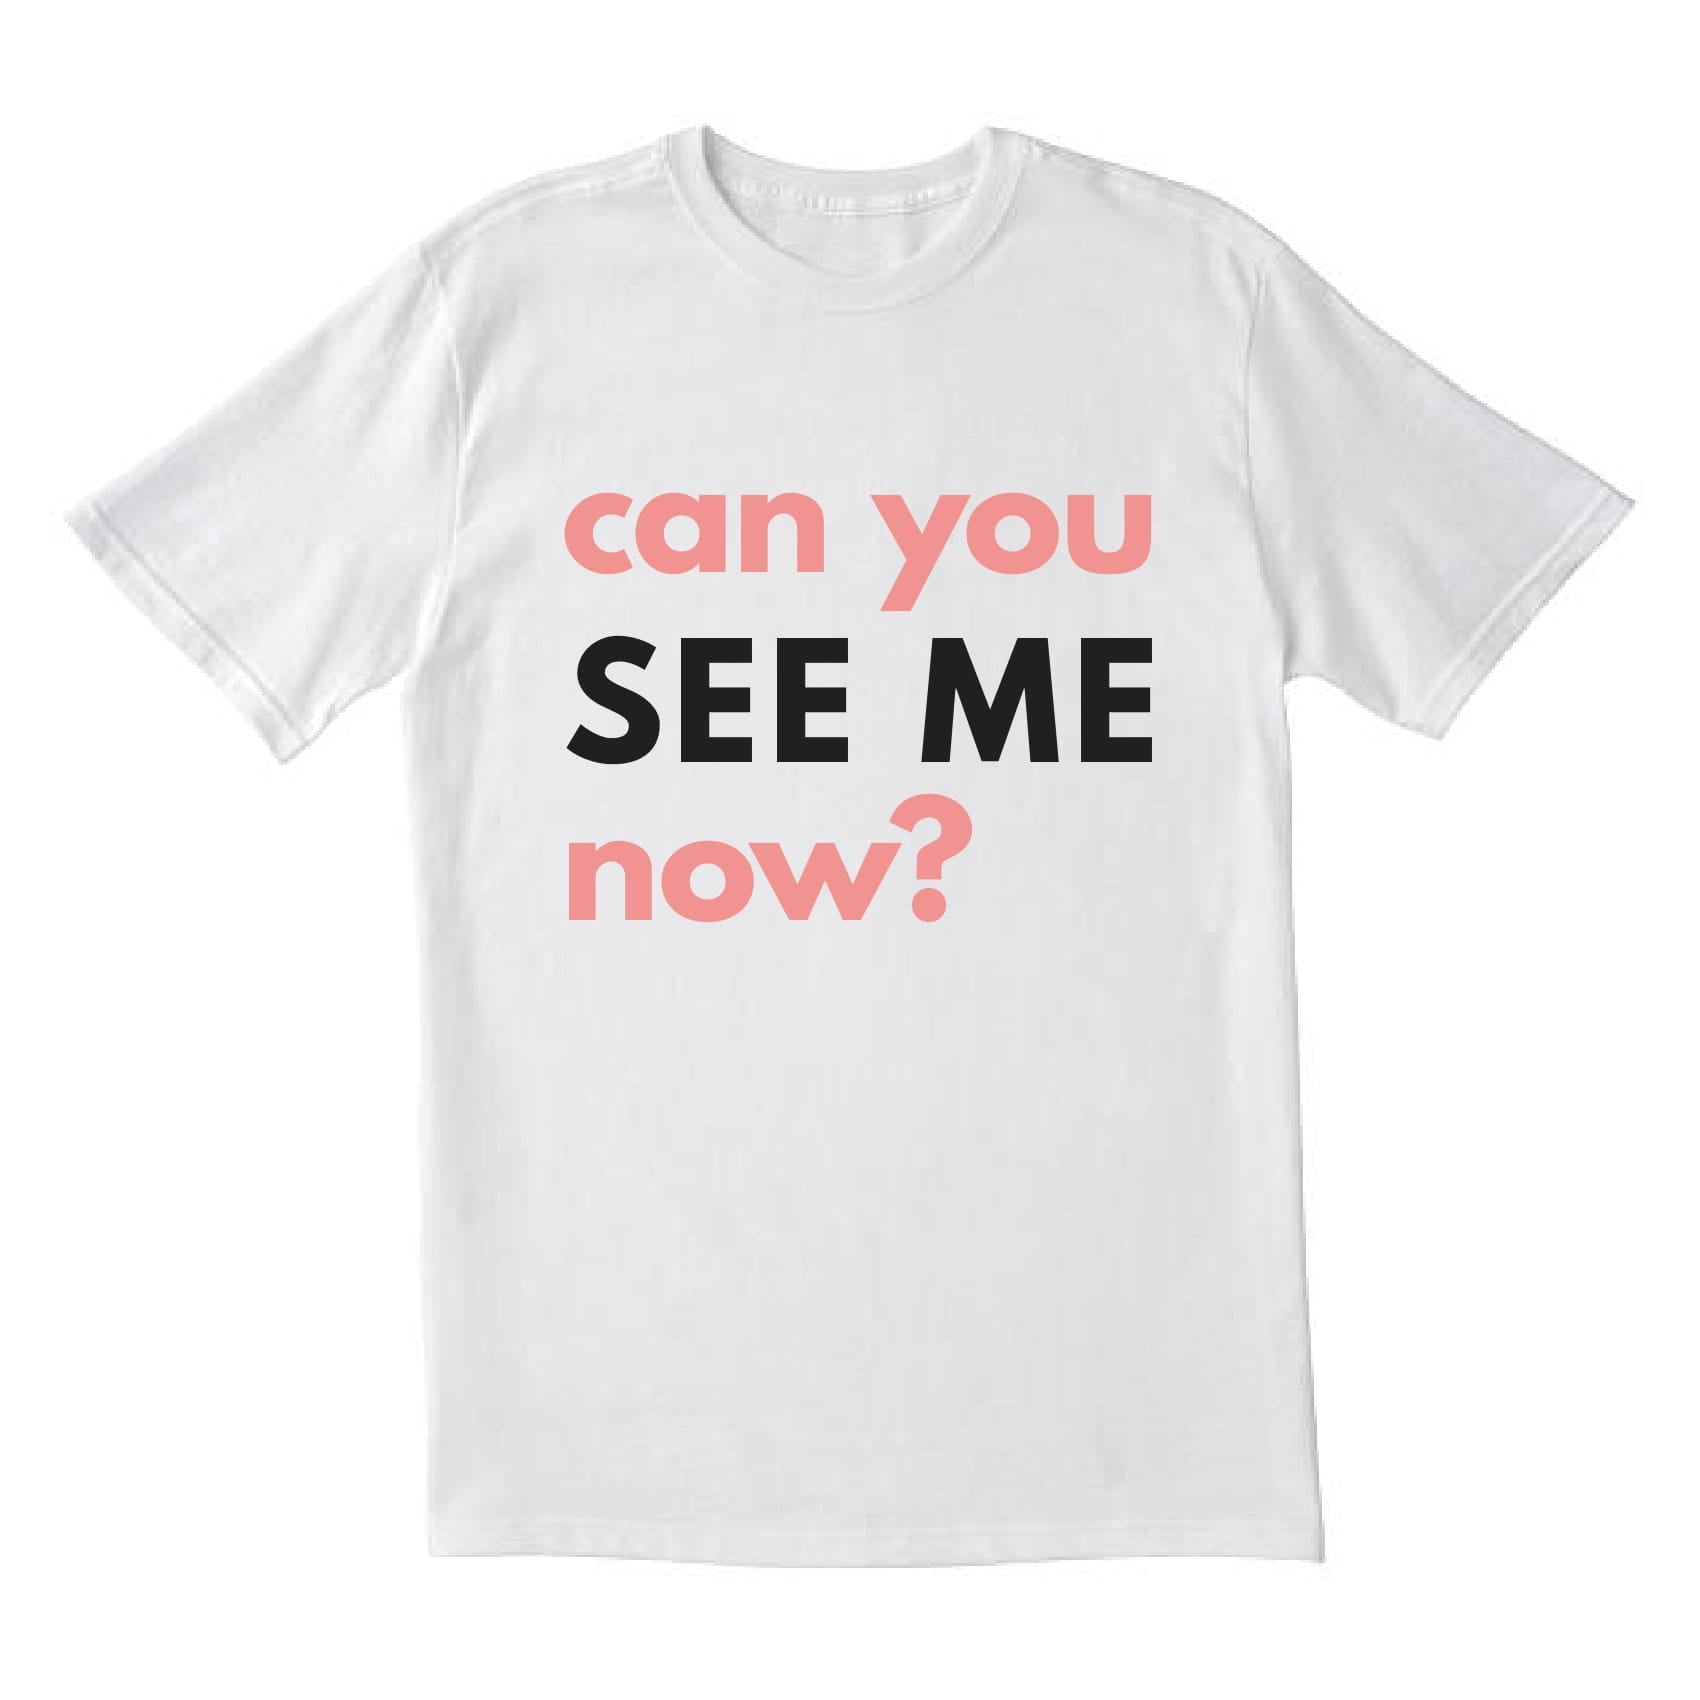 'Can You SEE ME Now?' T-shirt in collaboration with All SHE Makes